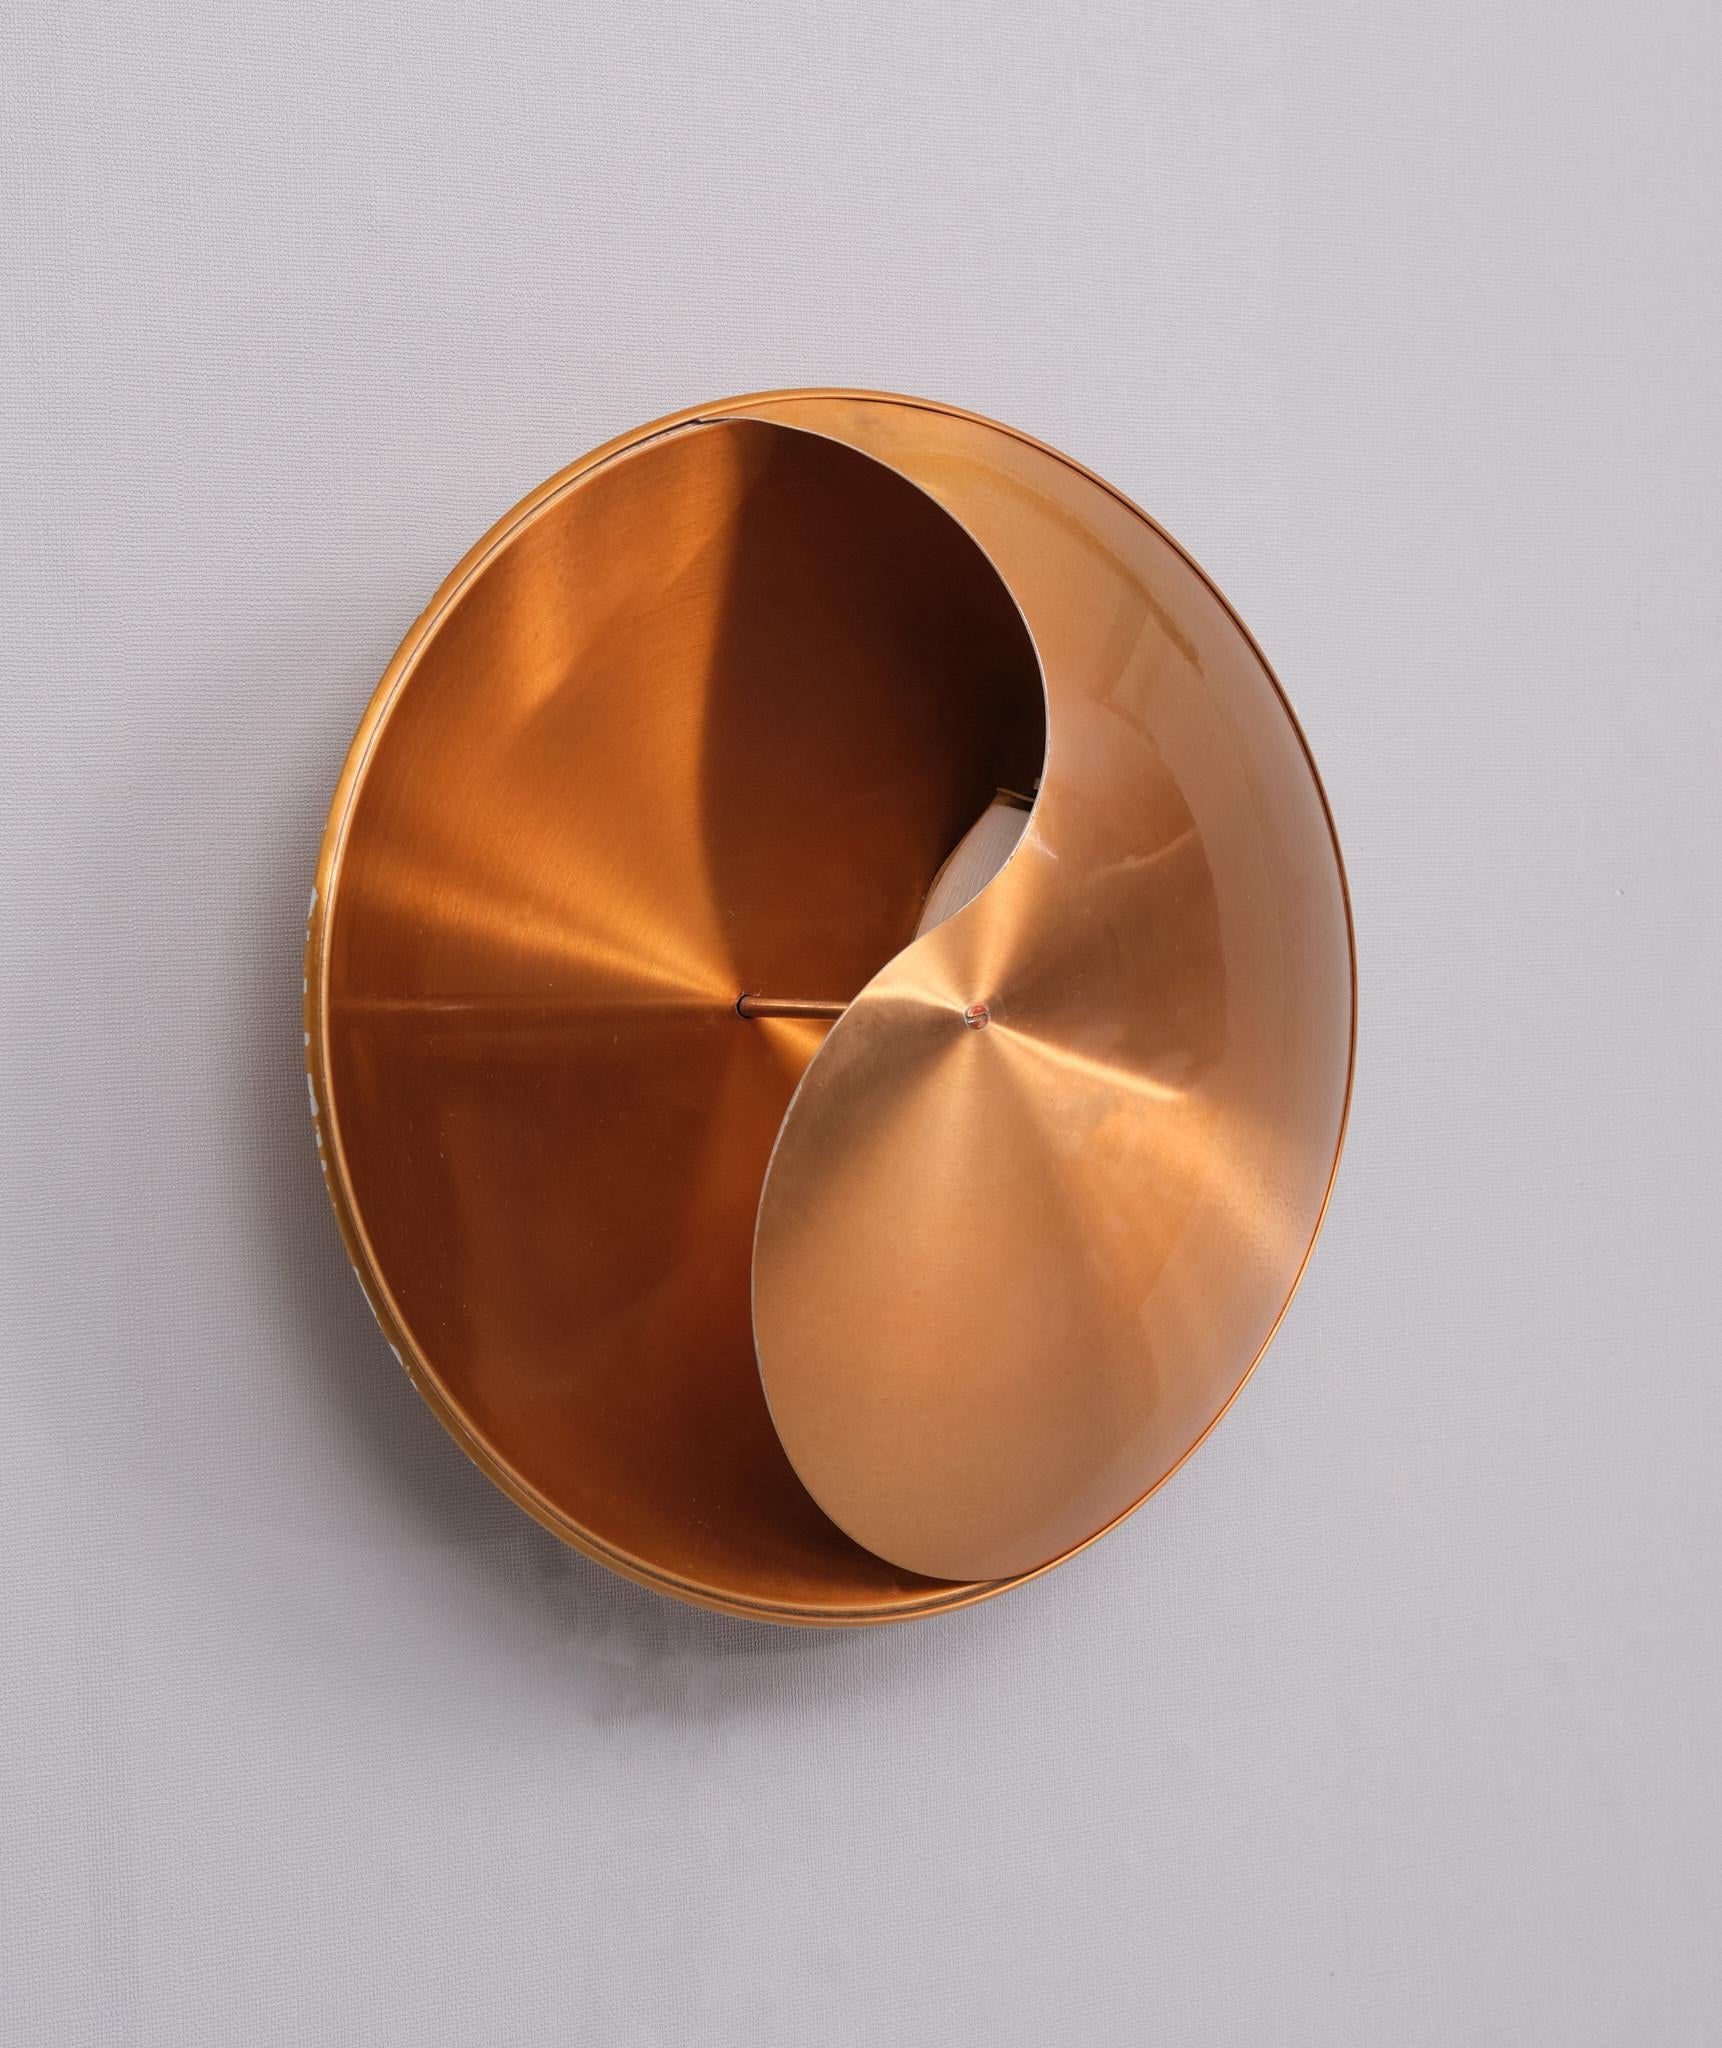 Copper-colored Aluminum Yin Yang wall lamp .designed by Hermian Sneyders de Vogel for Raak in about 1968. Hermian Sneyders was a designer and goldsmith. She discovered in herself a passion for luminous jewelry, balance between light and dark and a